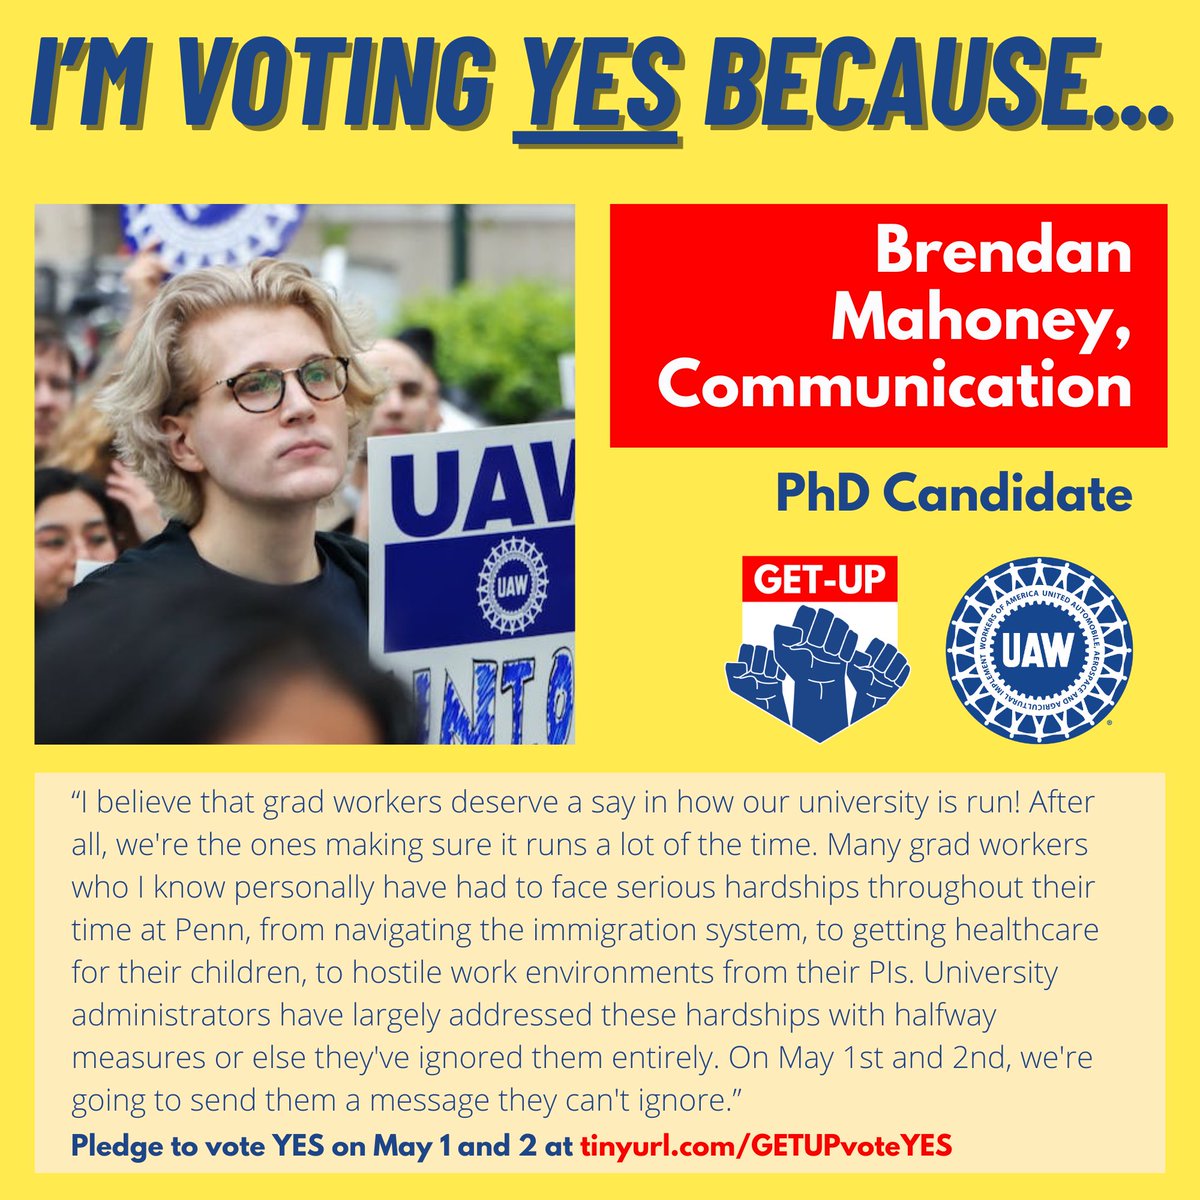 Brendan is voting yes because we should have a say in our own working conditions! It's time we stop relying on the good graces of administrators. Pledge to vote YES at tinyurl.com/GETUPvoteYES